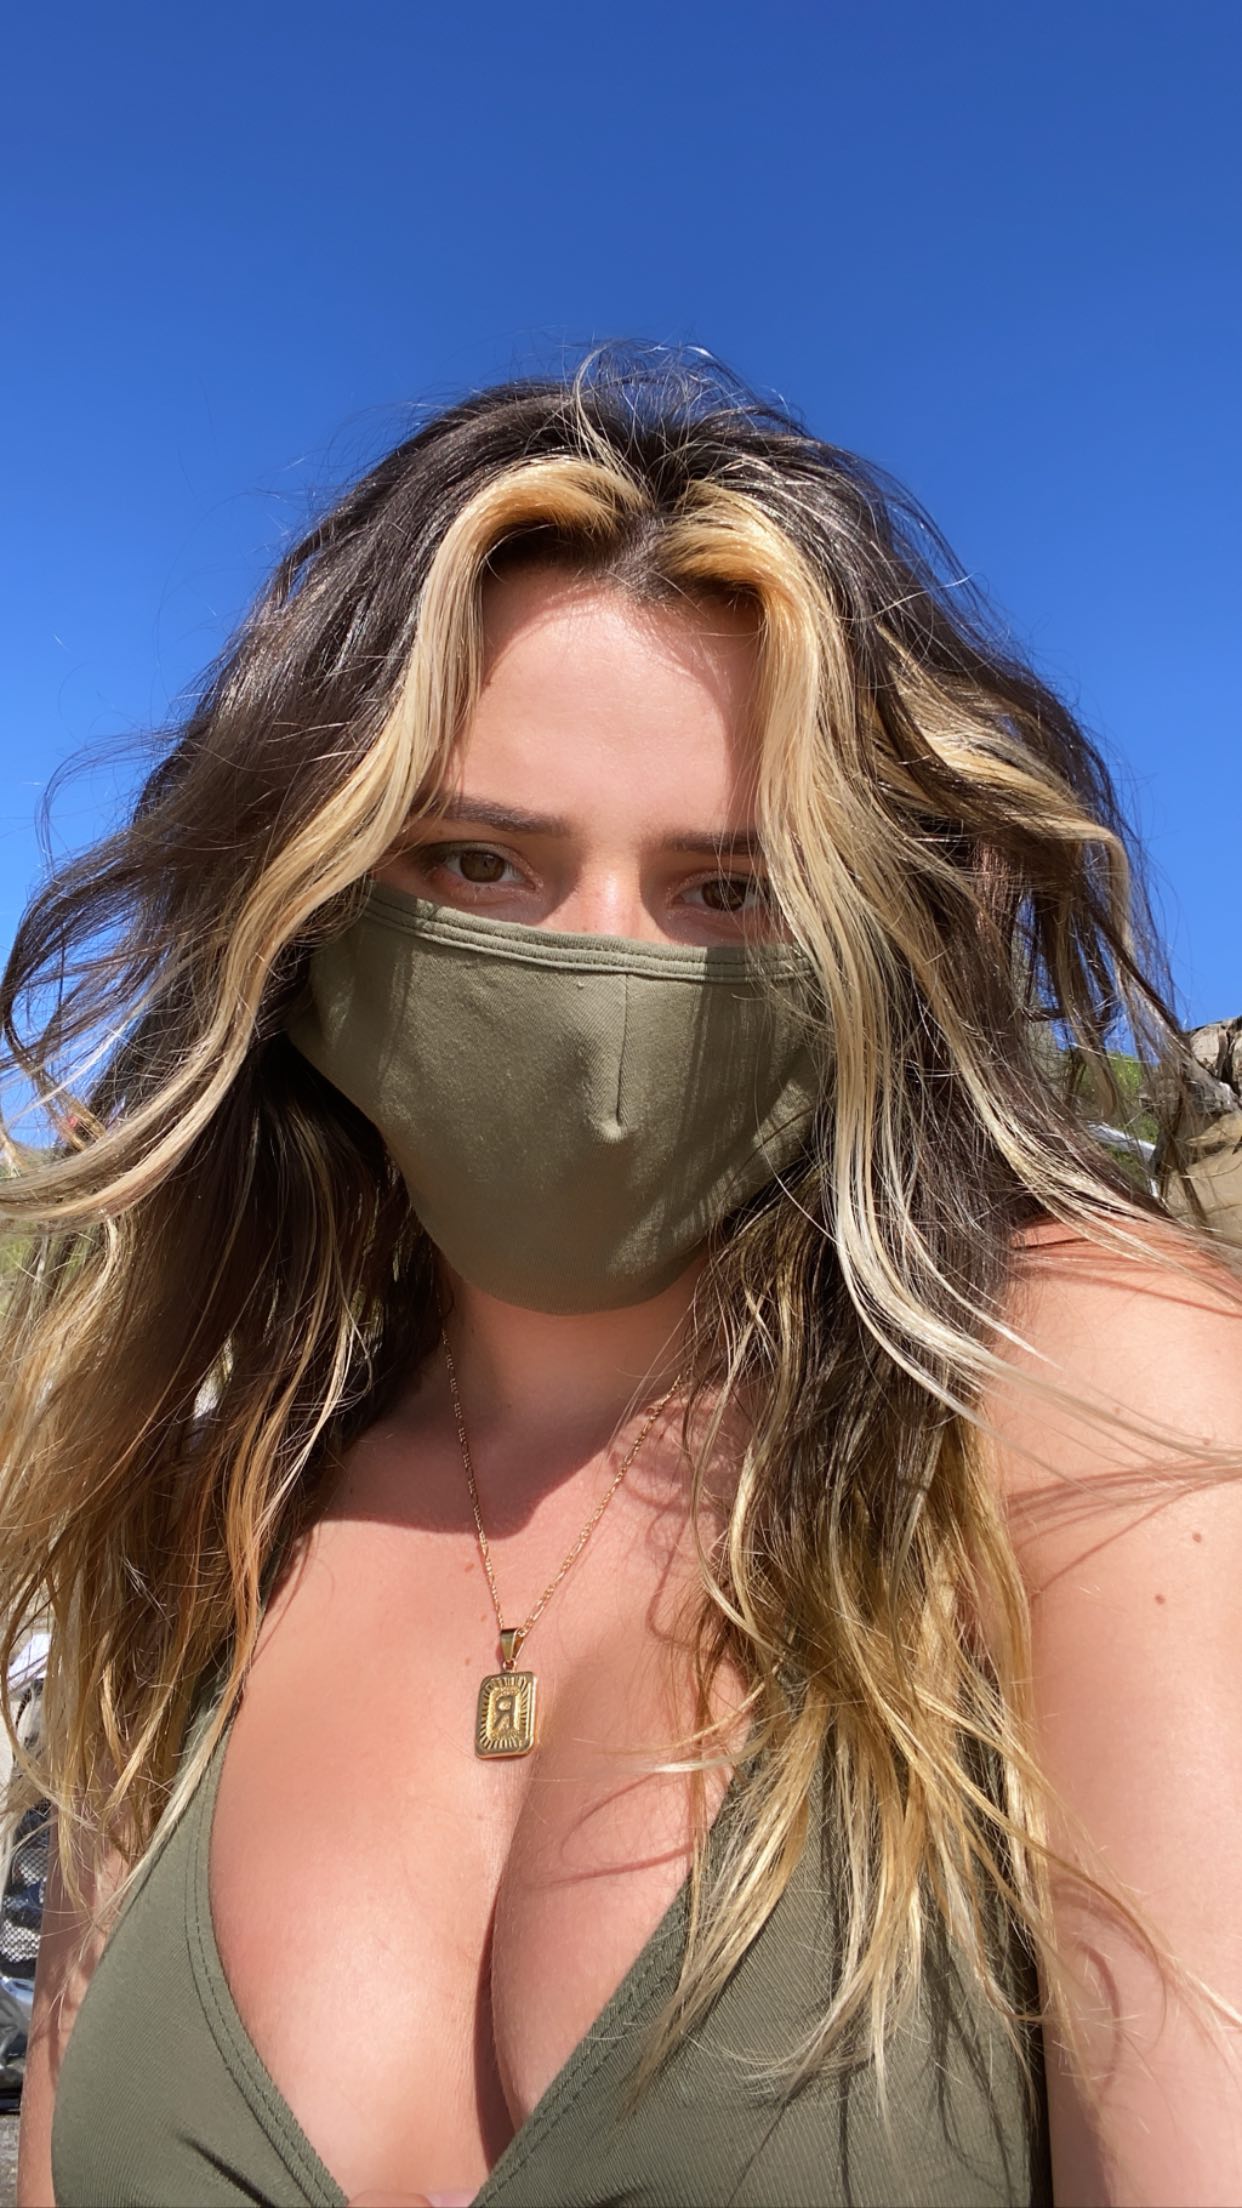 Photos n°1 : Bella Thorne Matches her Mask to her Bra!